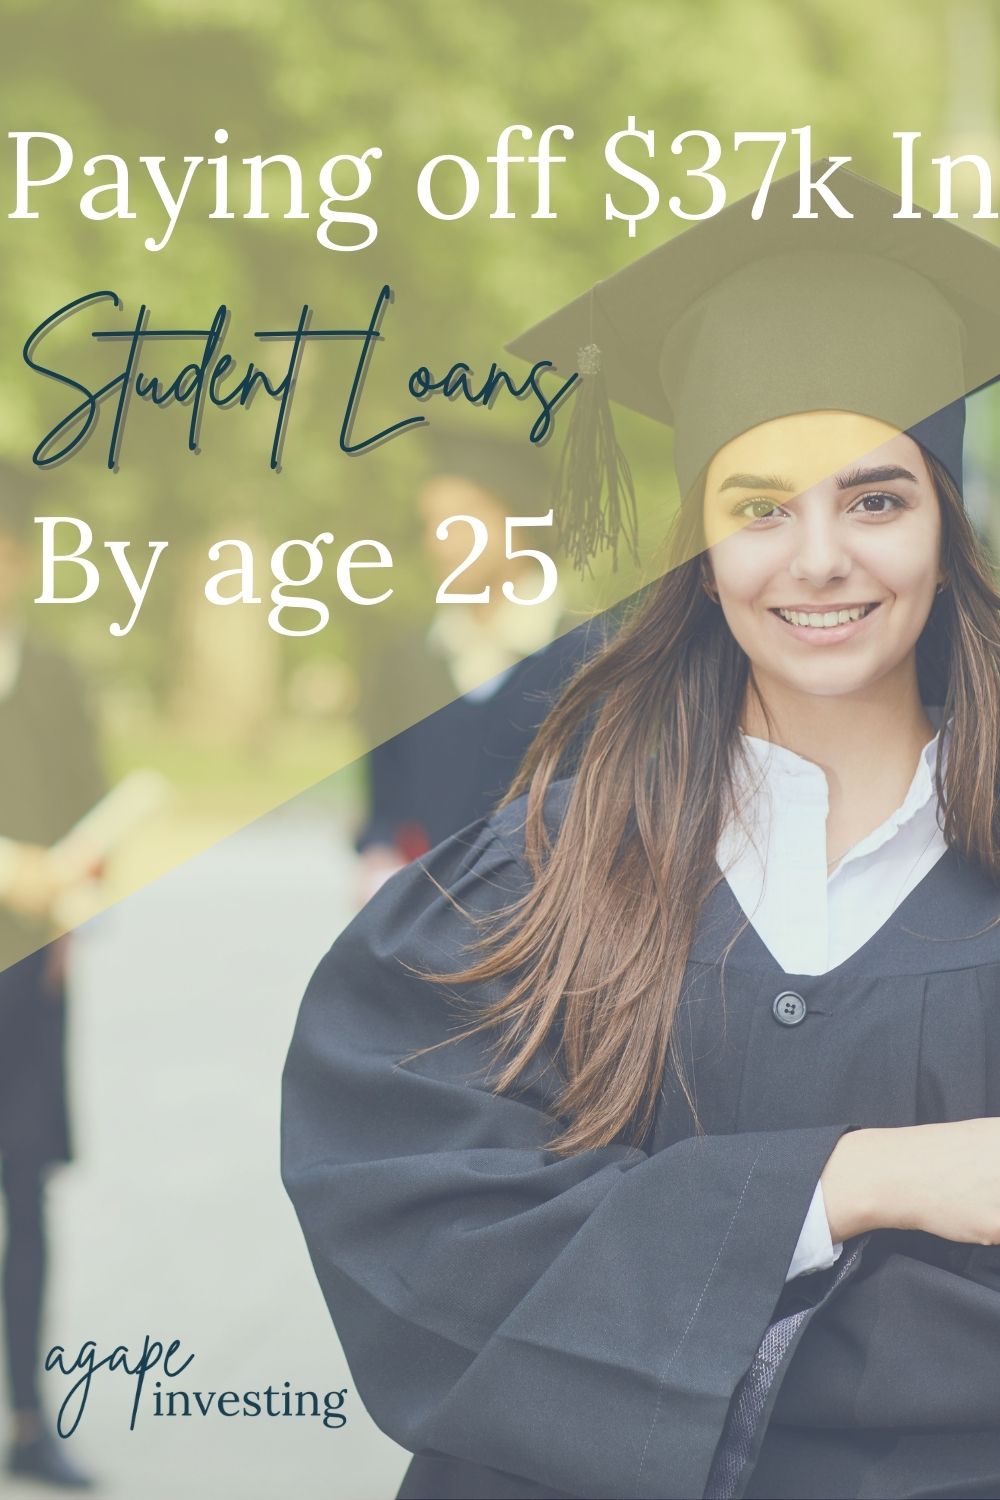 Learn more about how one girl paid off her student loan debt and then bought a rental property. Her story is inspiring and might just be the motivation you need to crush your own goals! #studentloandebt #debtpayoff #payoffdebt #rentalproperties